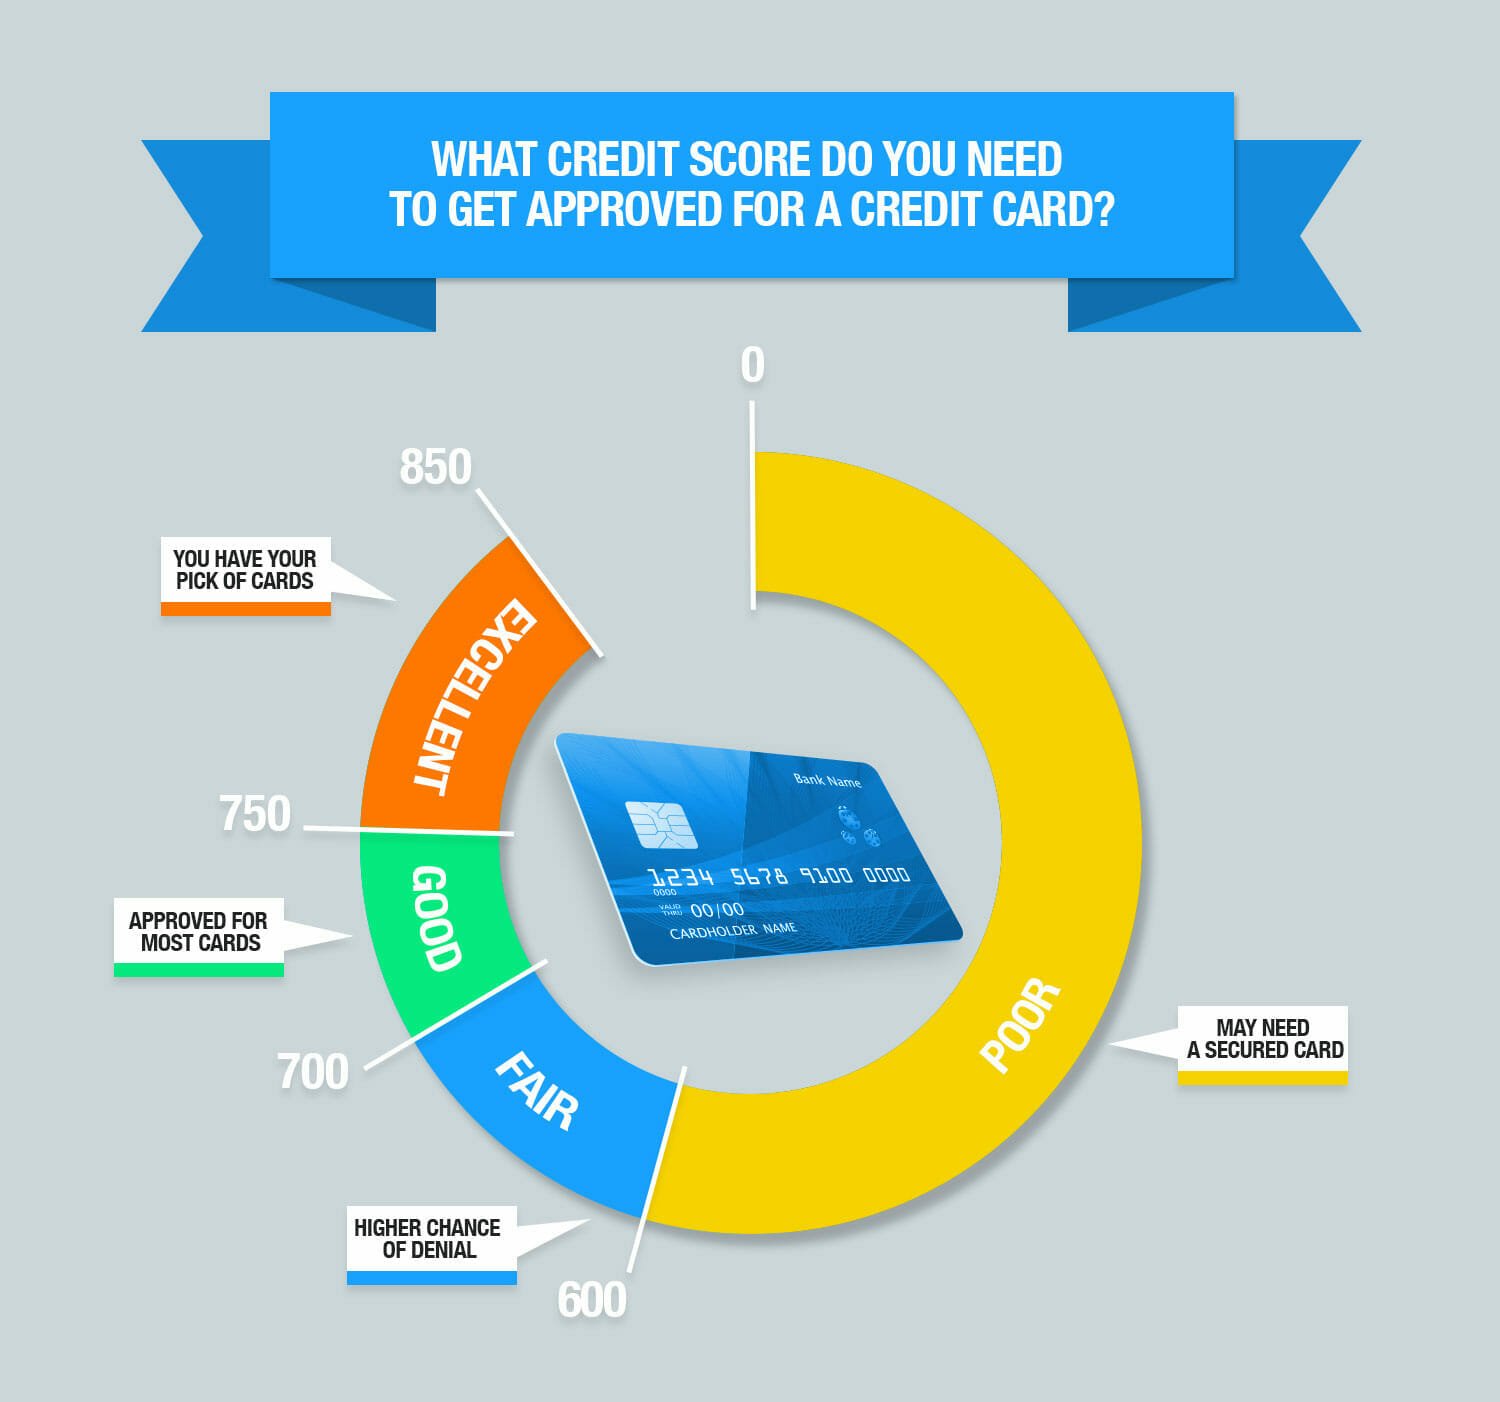 Credit Score Requirements For Credit Card Approval